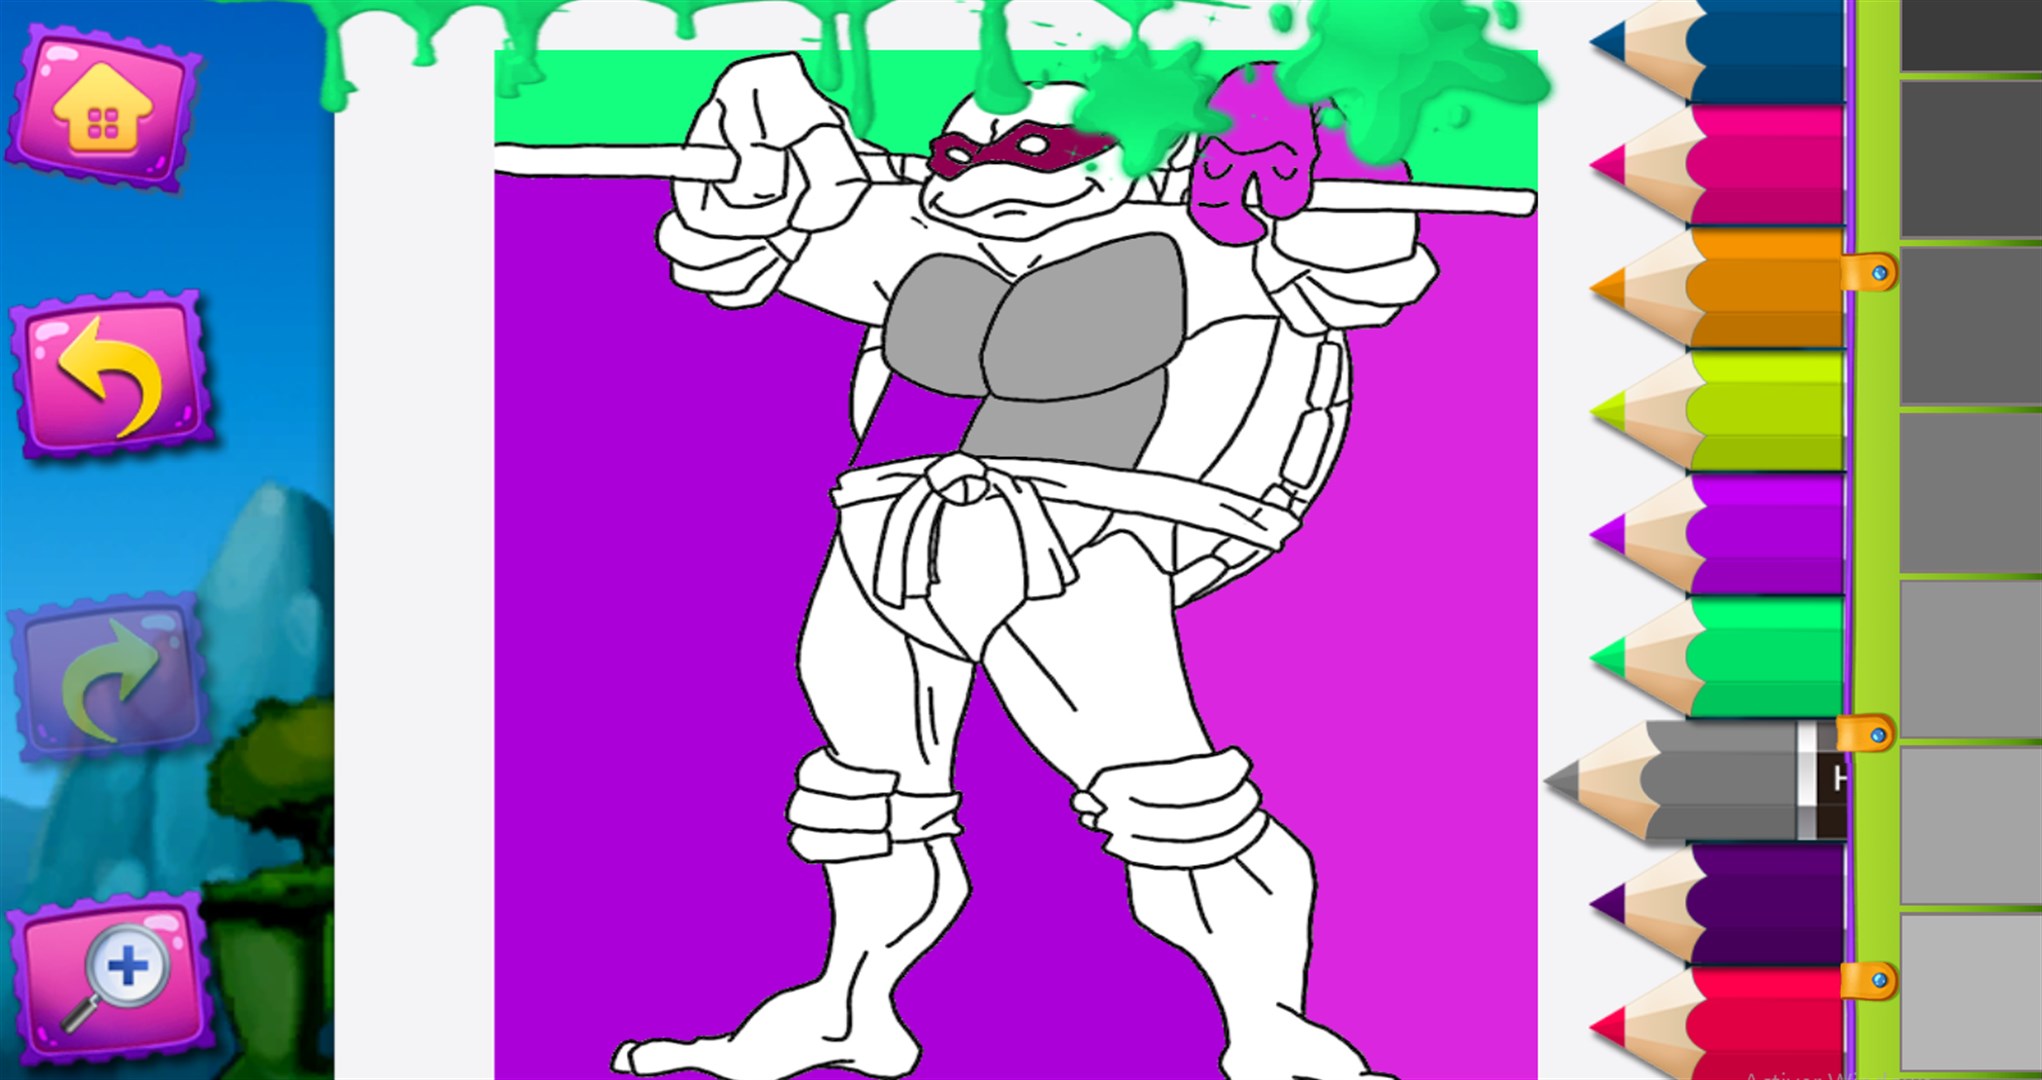 Superhero coloring pages, Turtle coloring pages, Ninja turtle coloring pages